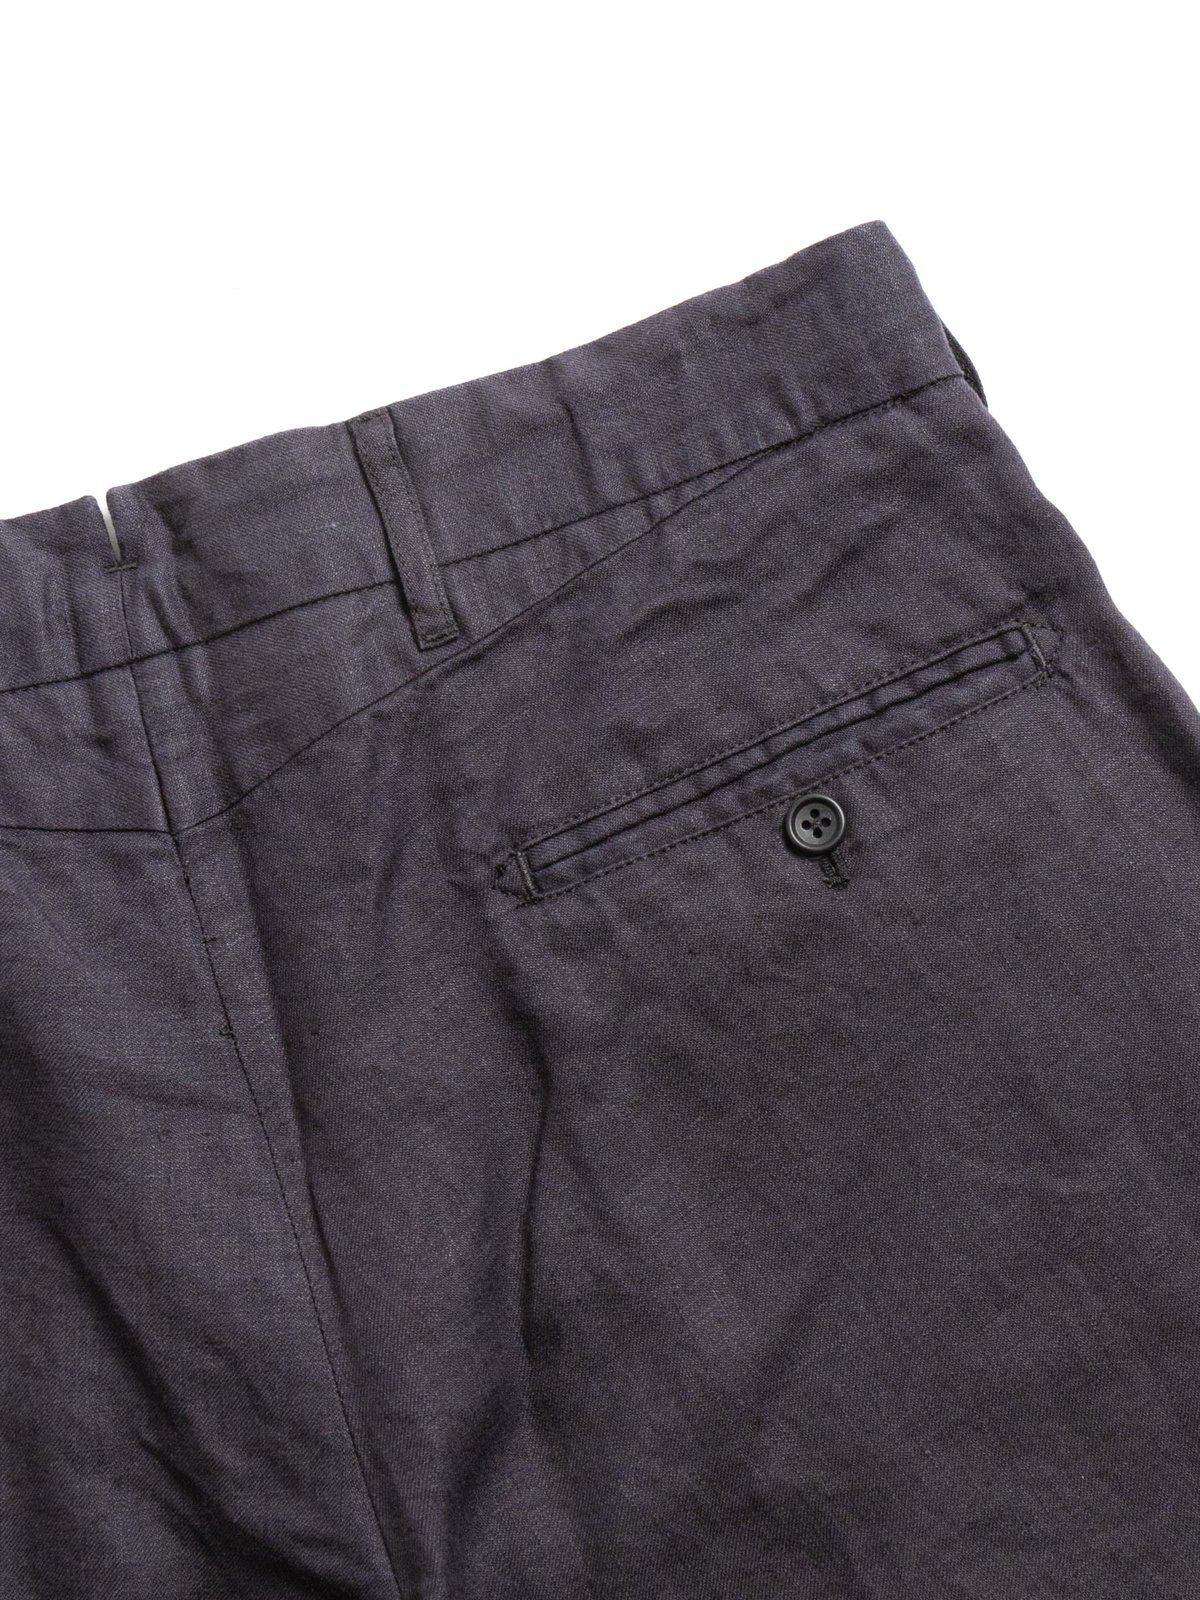 ANDOVER PANT NAVY LINEN TWILL - Image 5